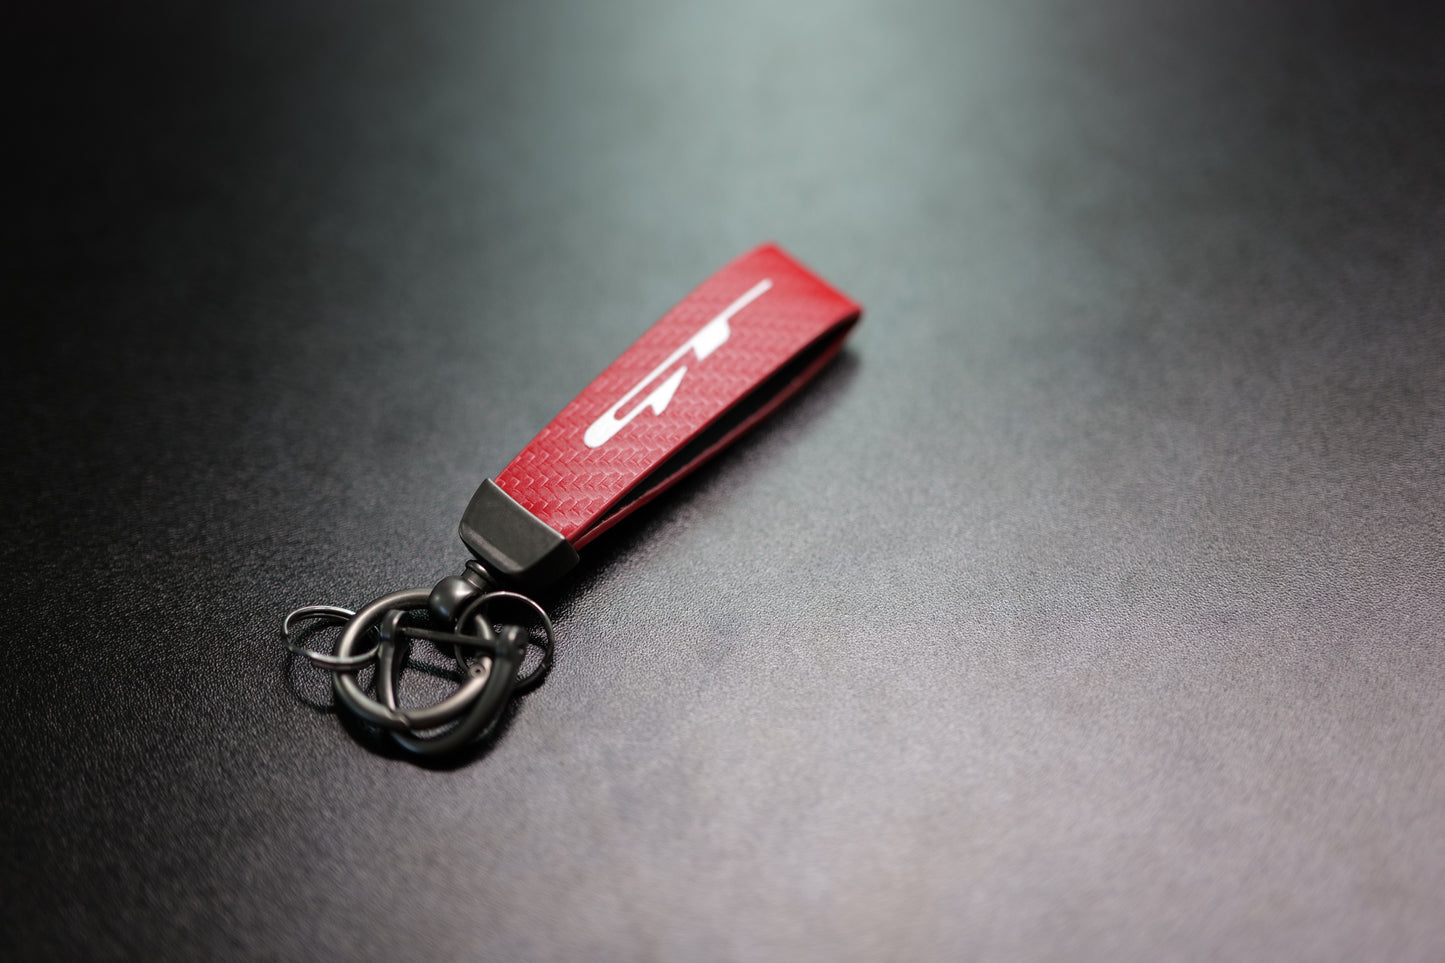 GT-line/GT Carbon Fiber Pattern Keychain - Perfect Fit for Kia Enthusiasts